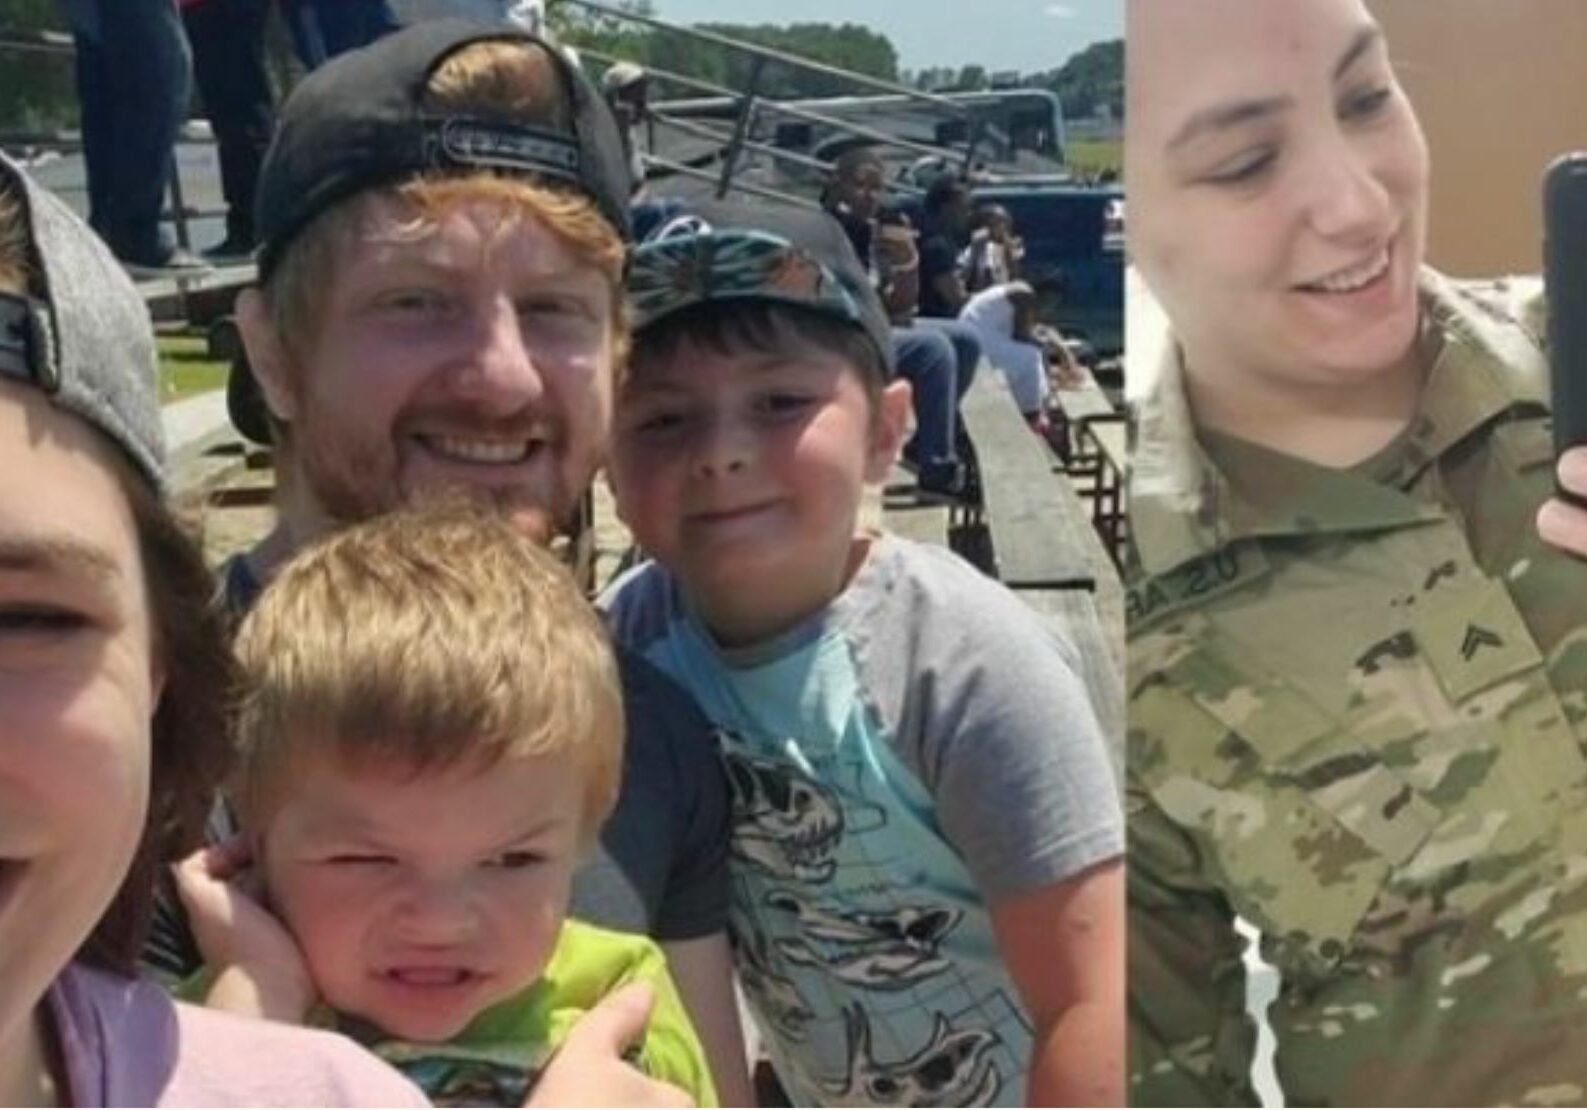 Photos of CPL Erin Sasse and family (photos courtesy of Delaware National Guard)